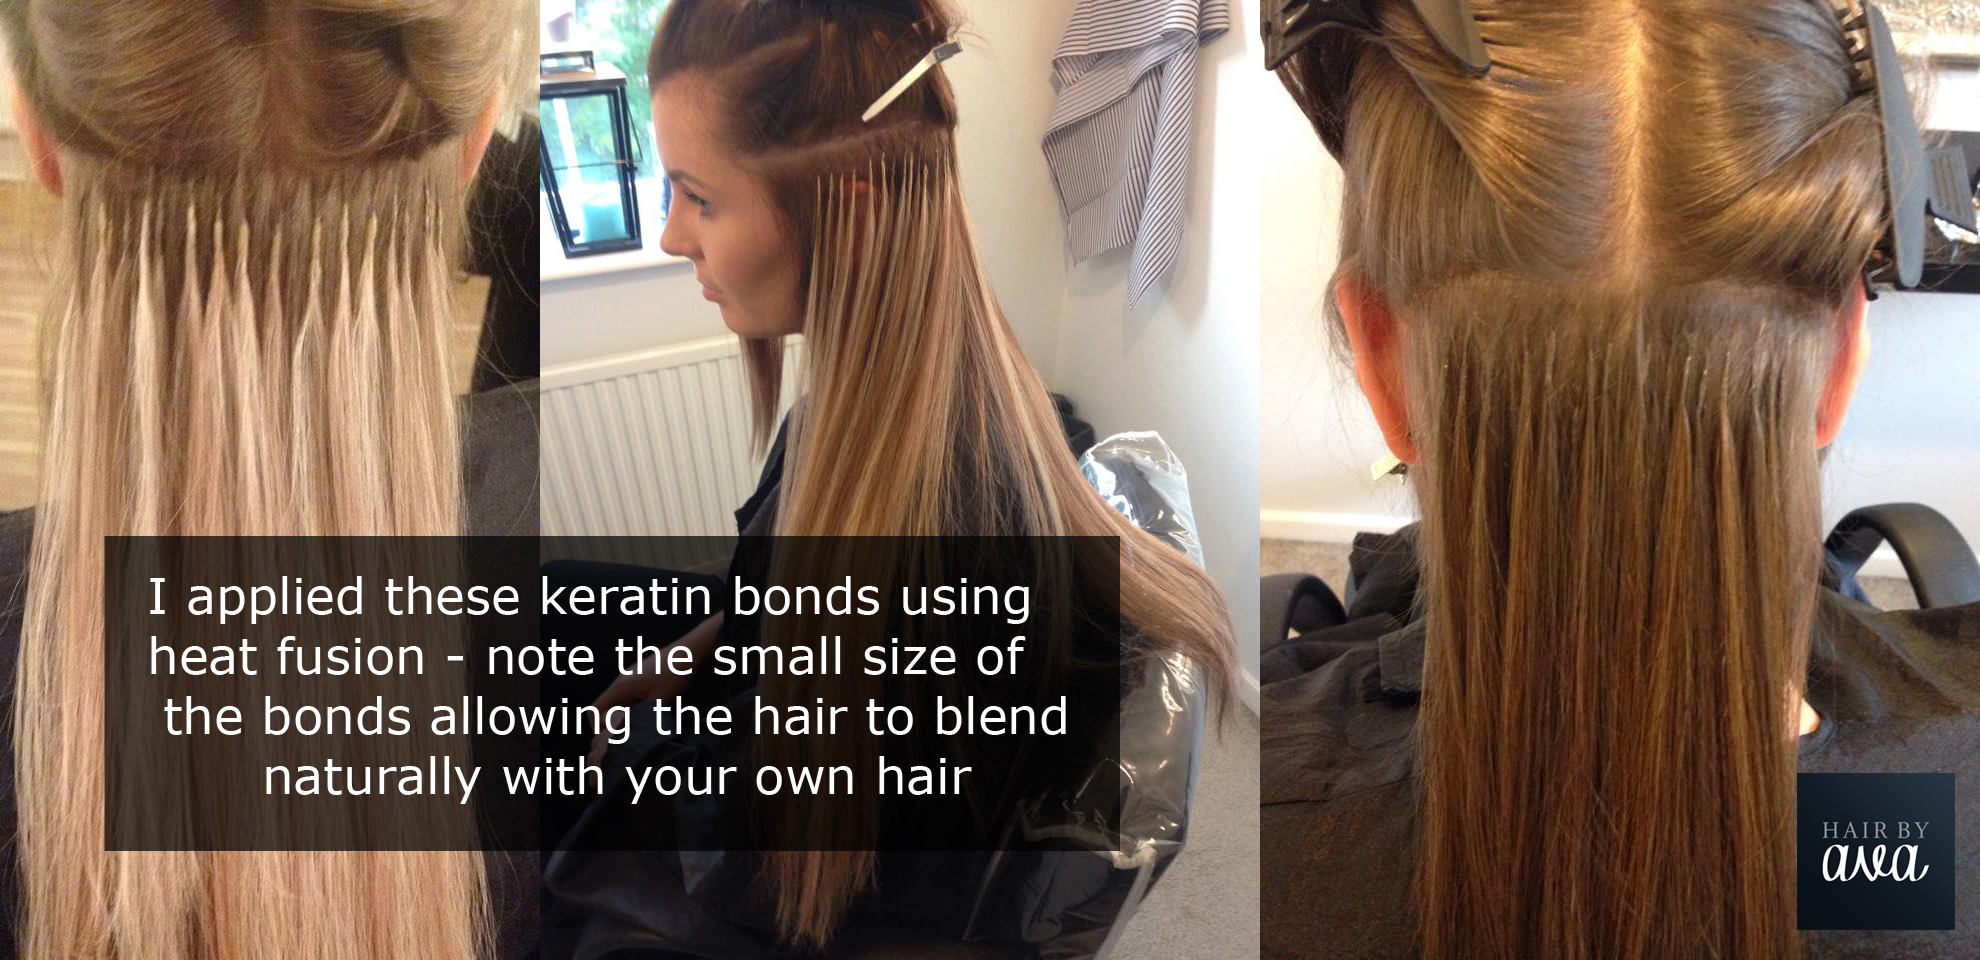 Keratin Bonds - Great Lengths extensions applied by Hair by Ava